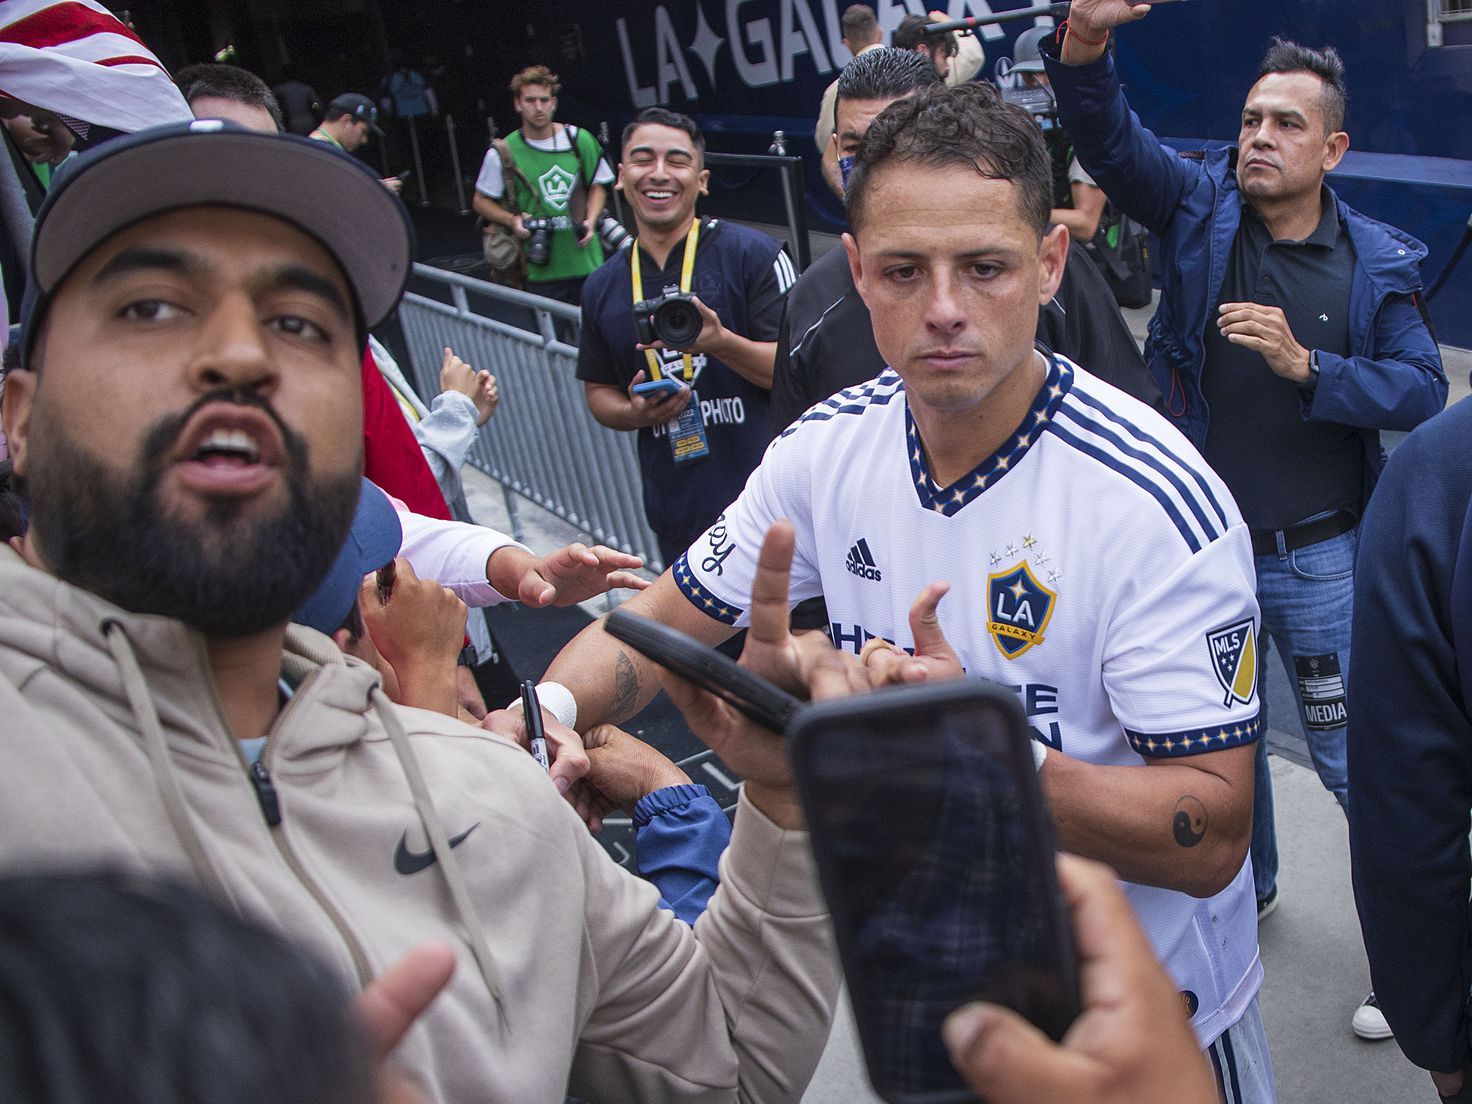 There's a time and a place' - Javier 'Chicharito' Hernandez scolded by LA  Galaxy coach for Twitch stream